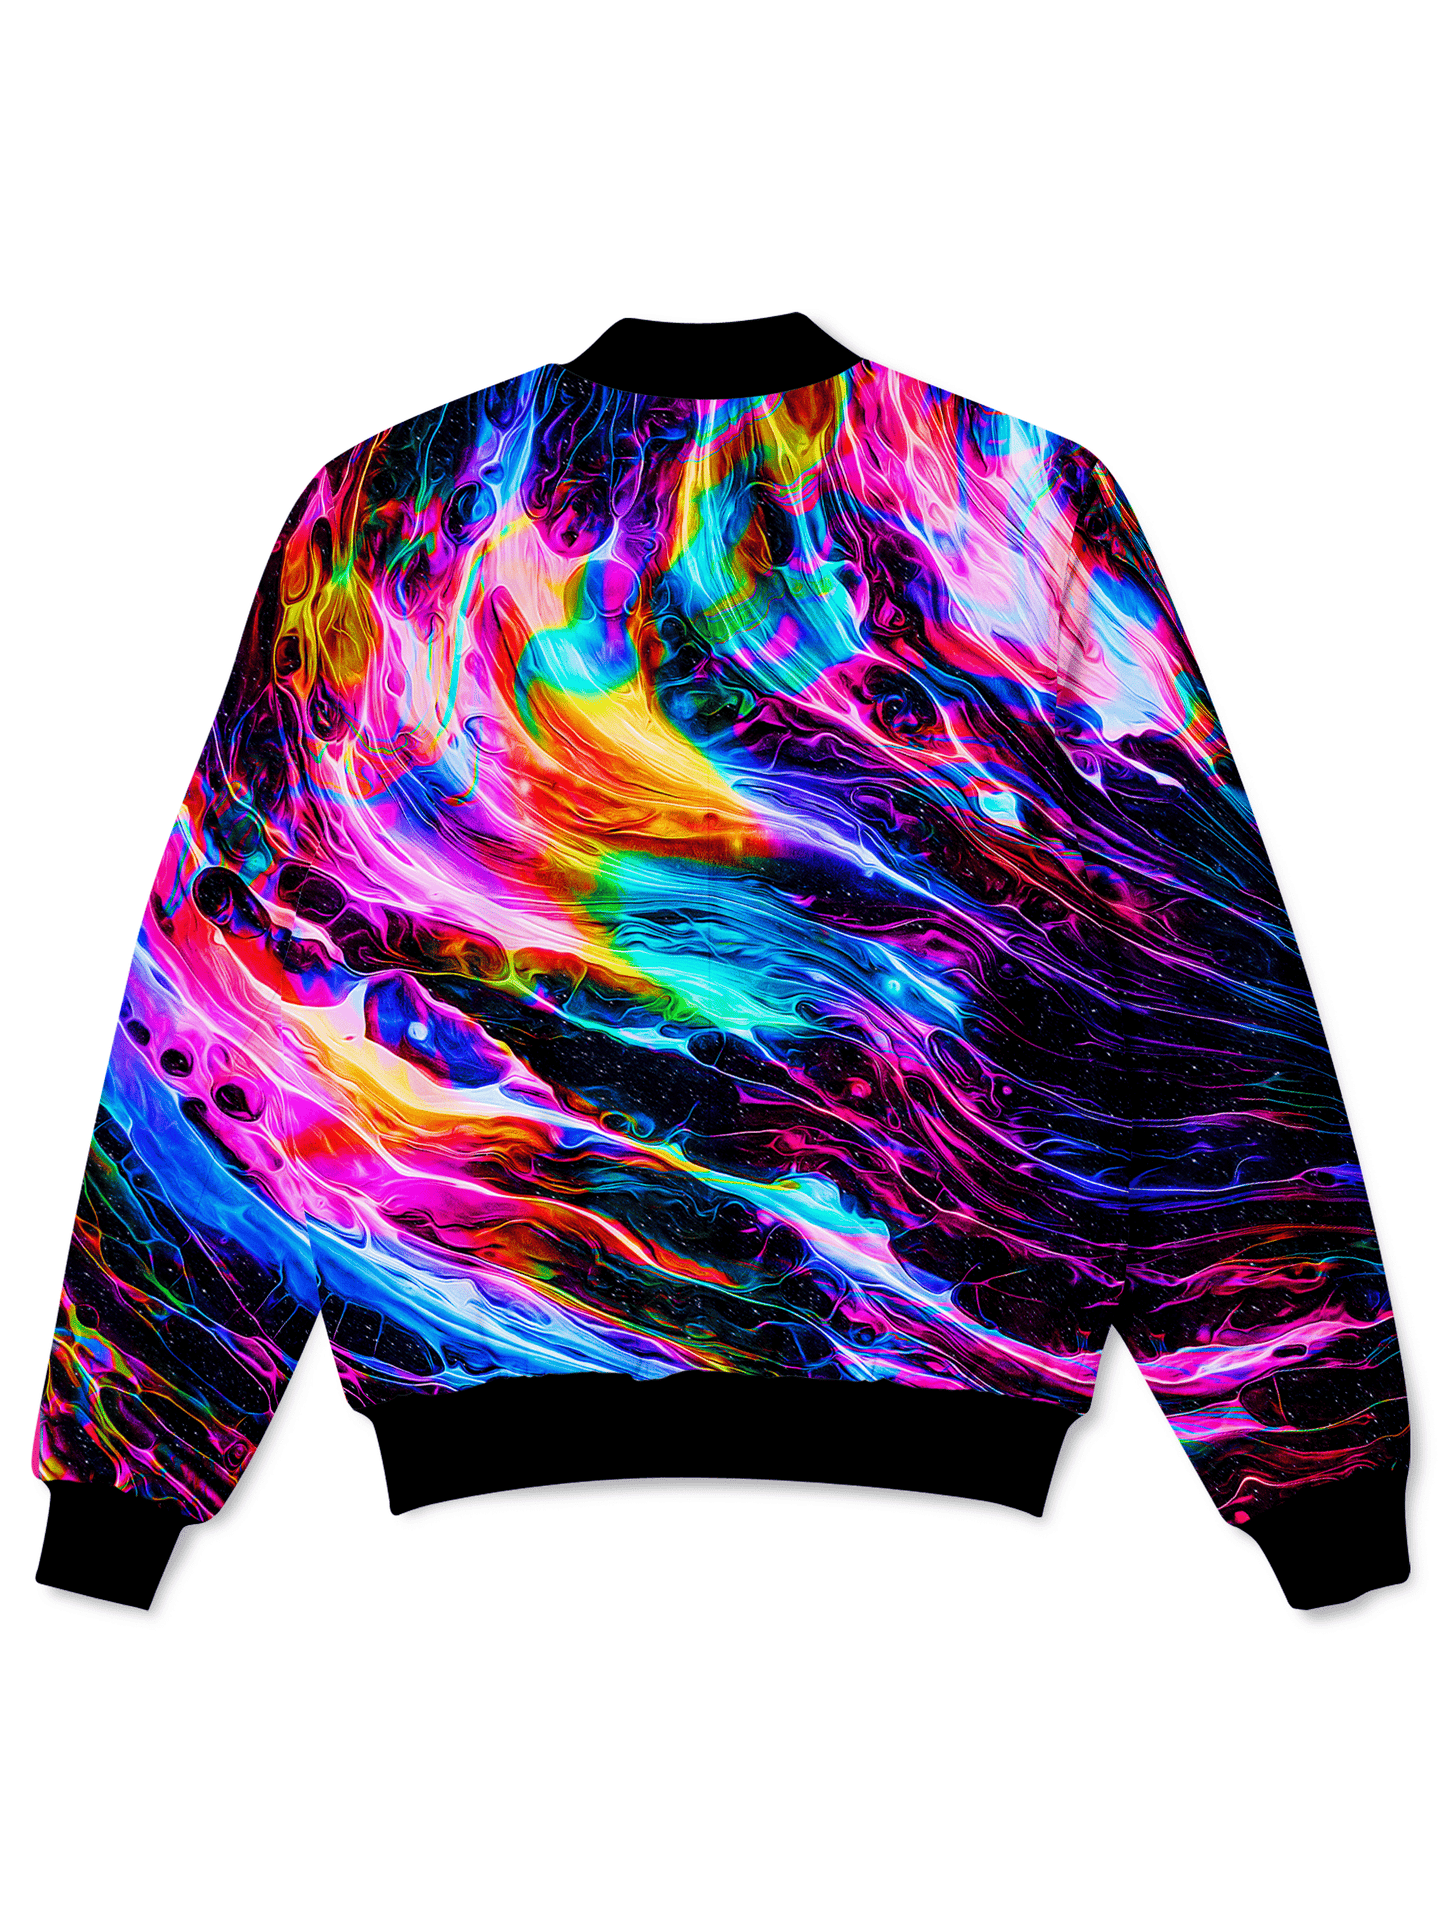 Hyperspace Bomber Jacket, Noctum X Truth, | iEDM